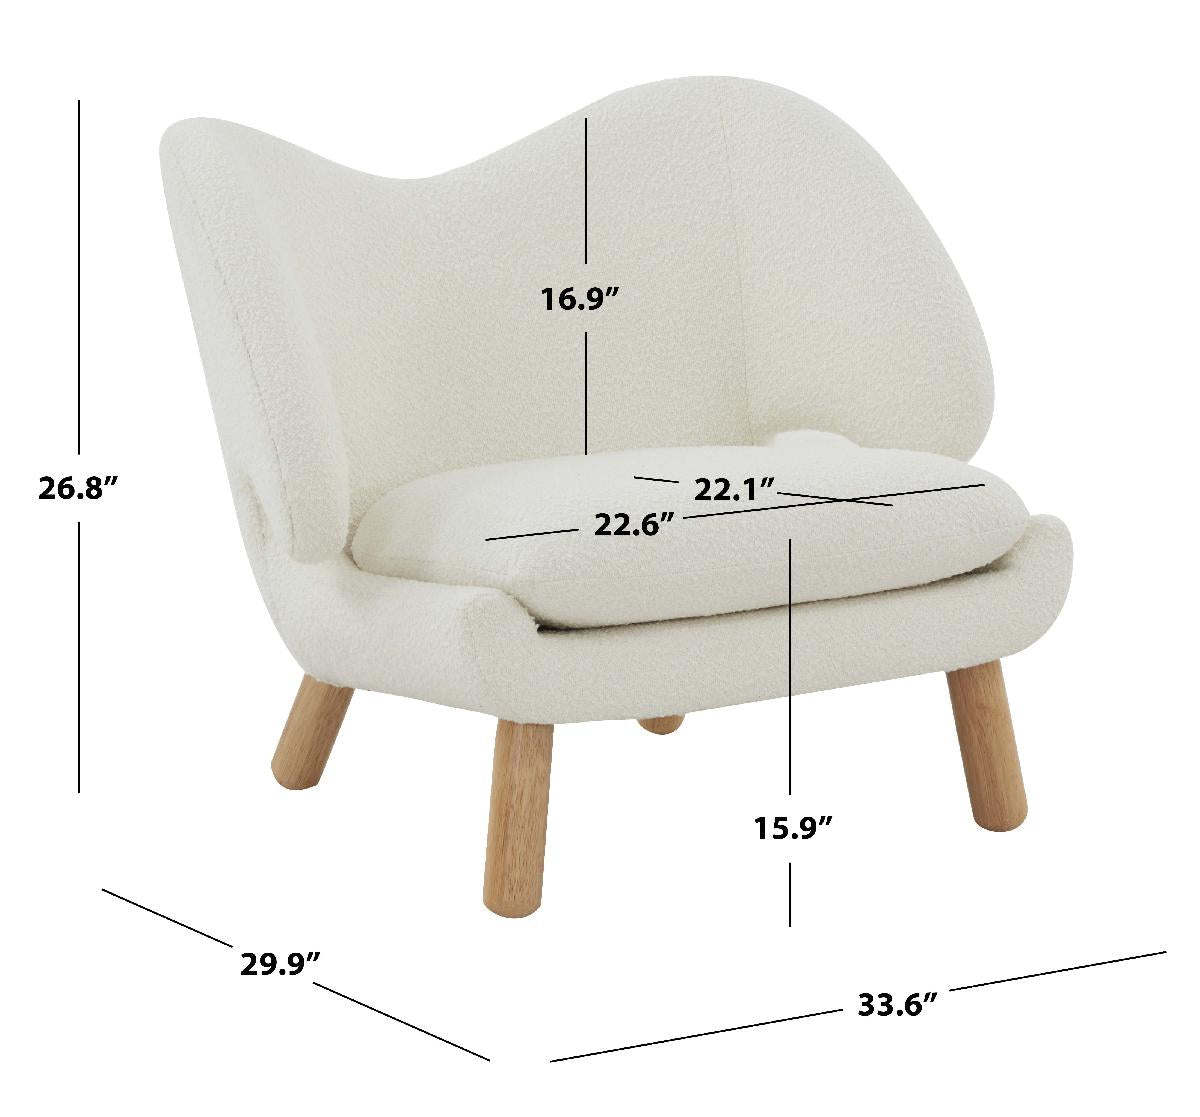 Safavieh Couture Felicia Contemporary Accent Chair - Ivory / Natural